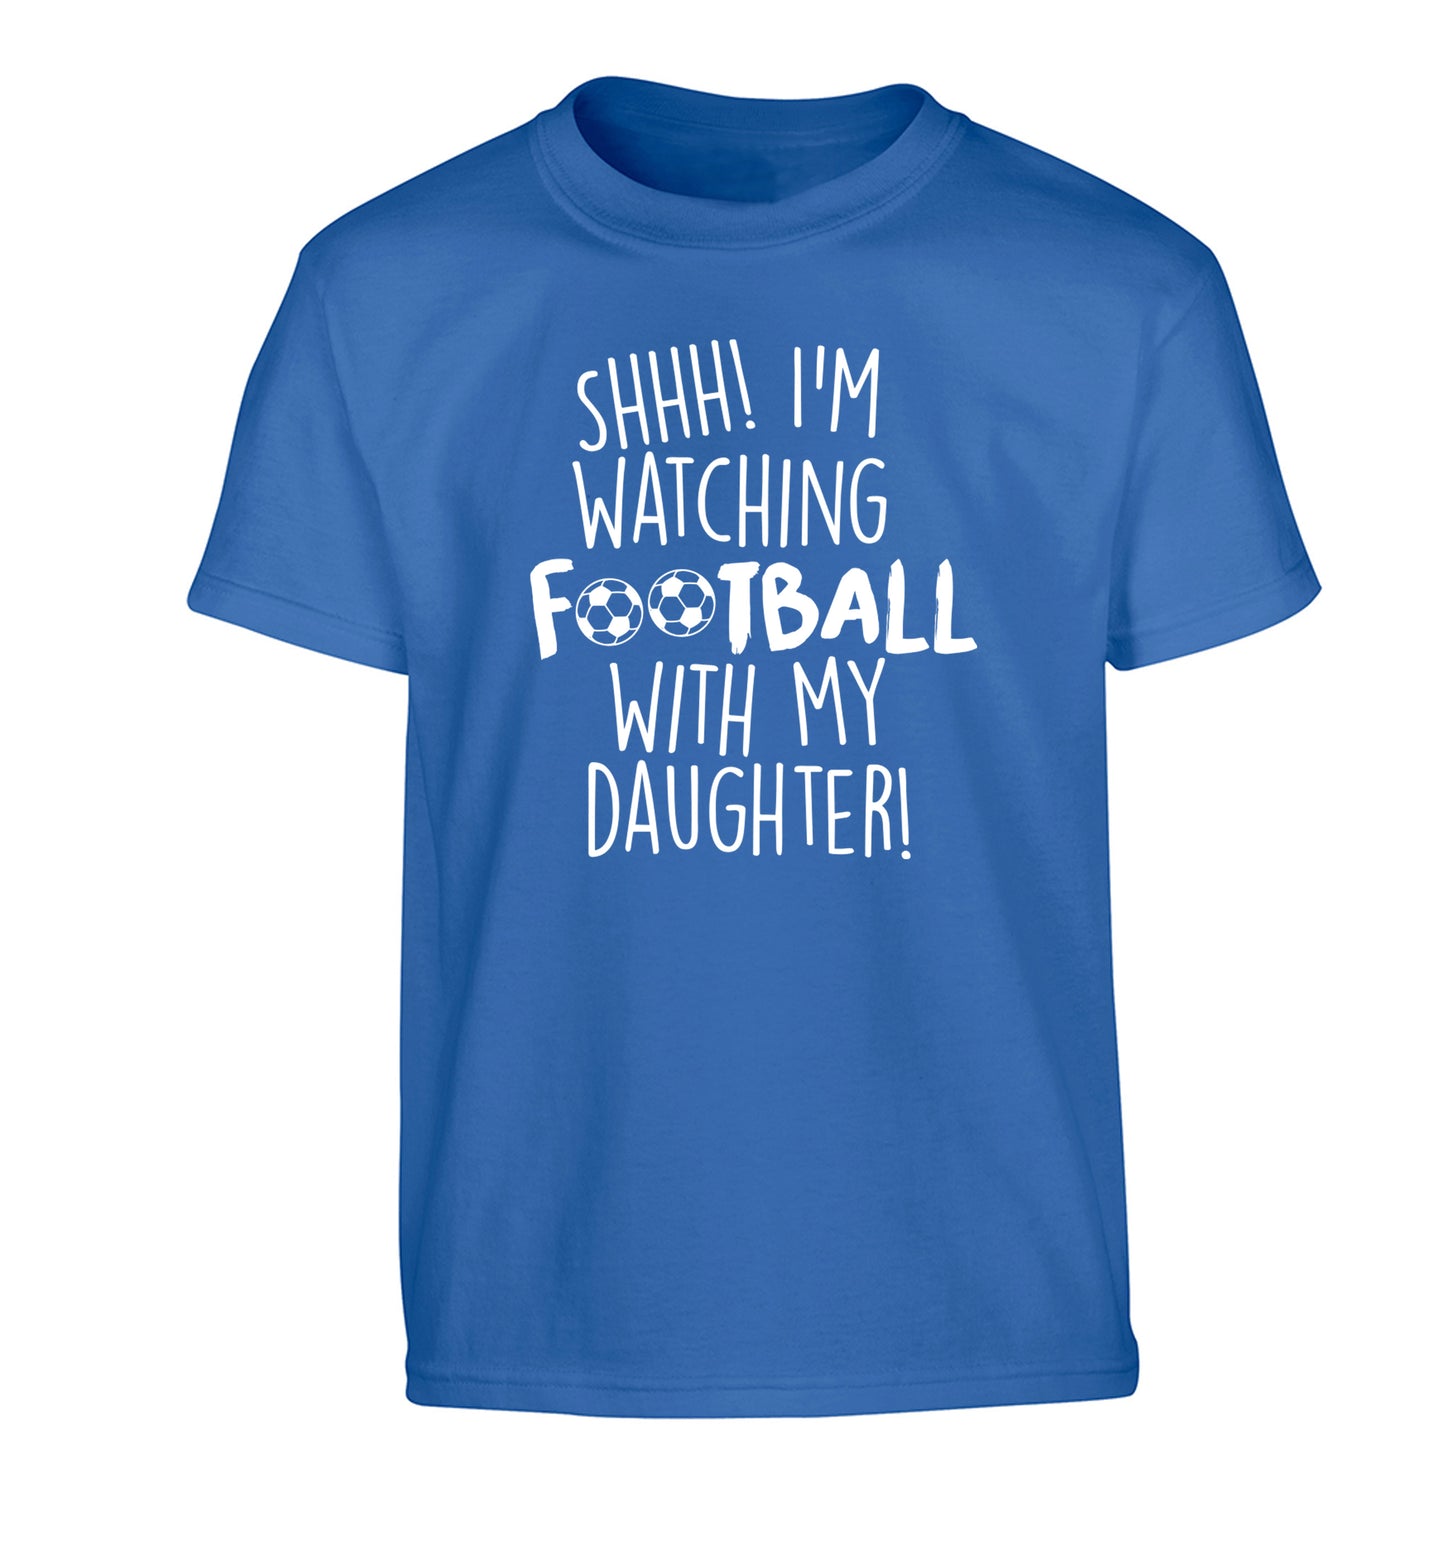 Shhh I'm watching football with my daughter Children's blue Tshirt 12-14 Years